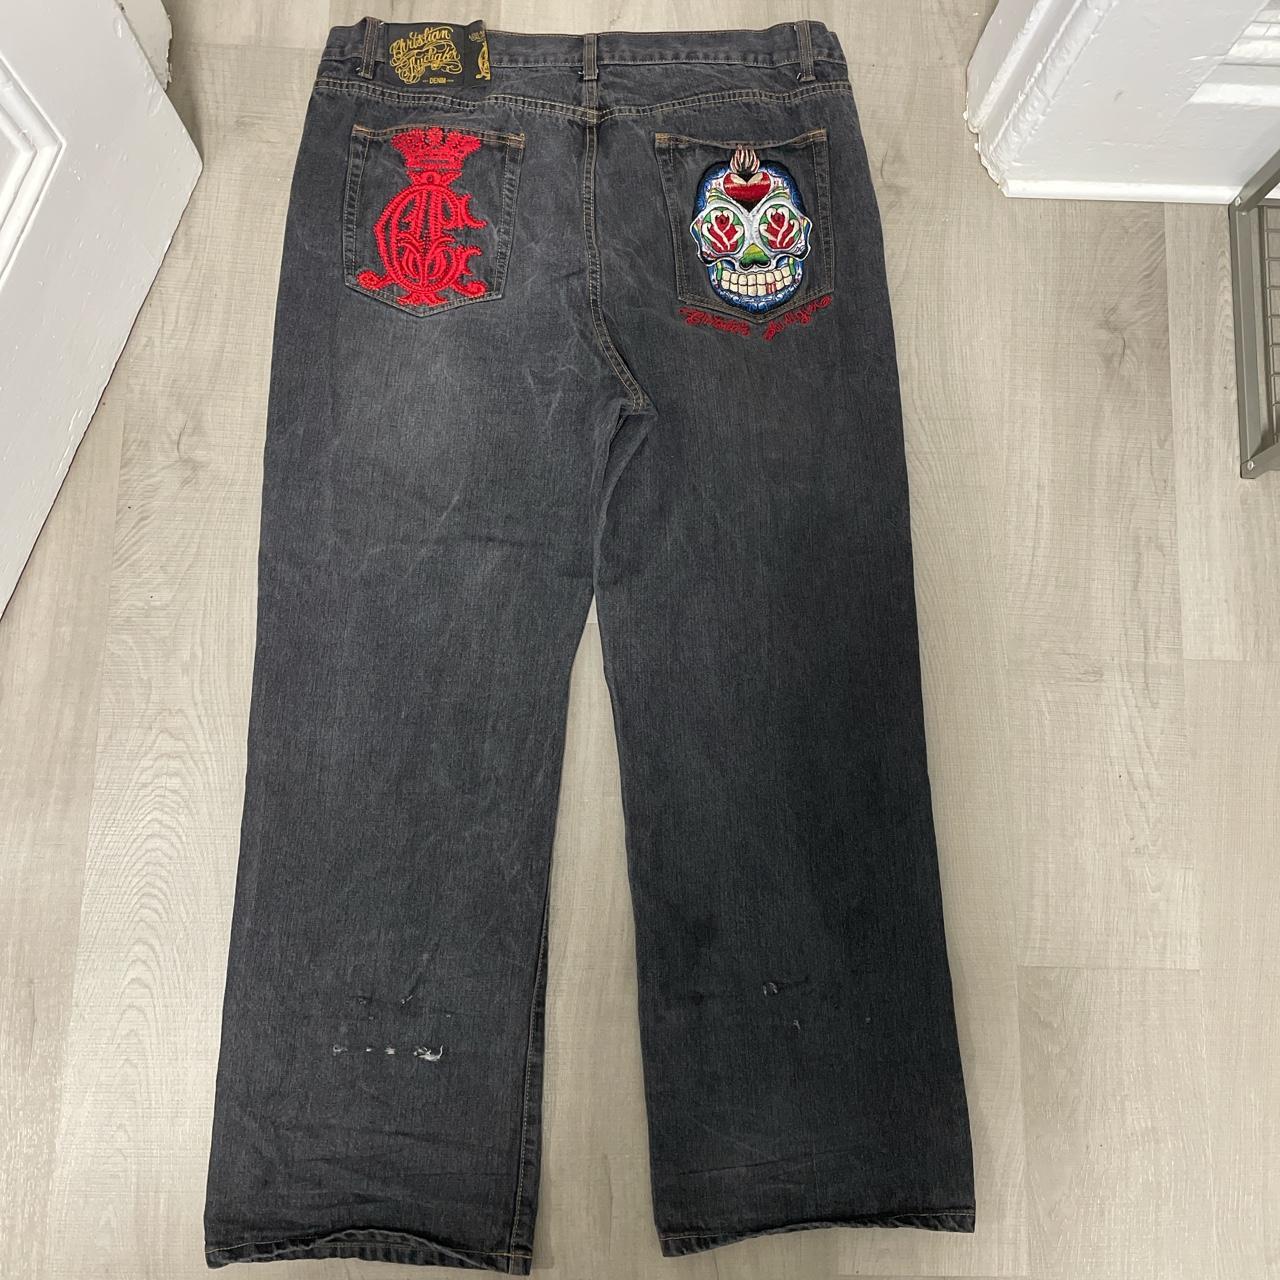 Ed Hardy Men's Black and Yellow Jeans | Depop